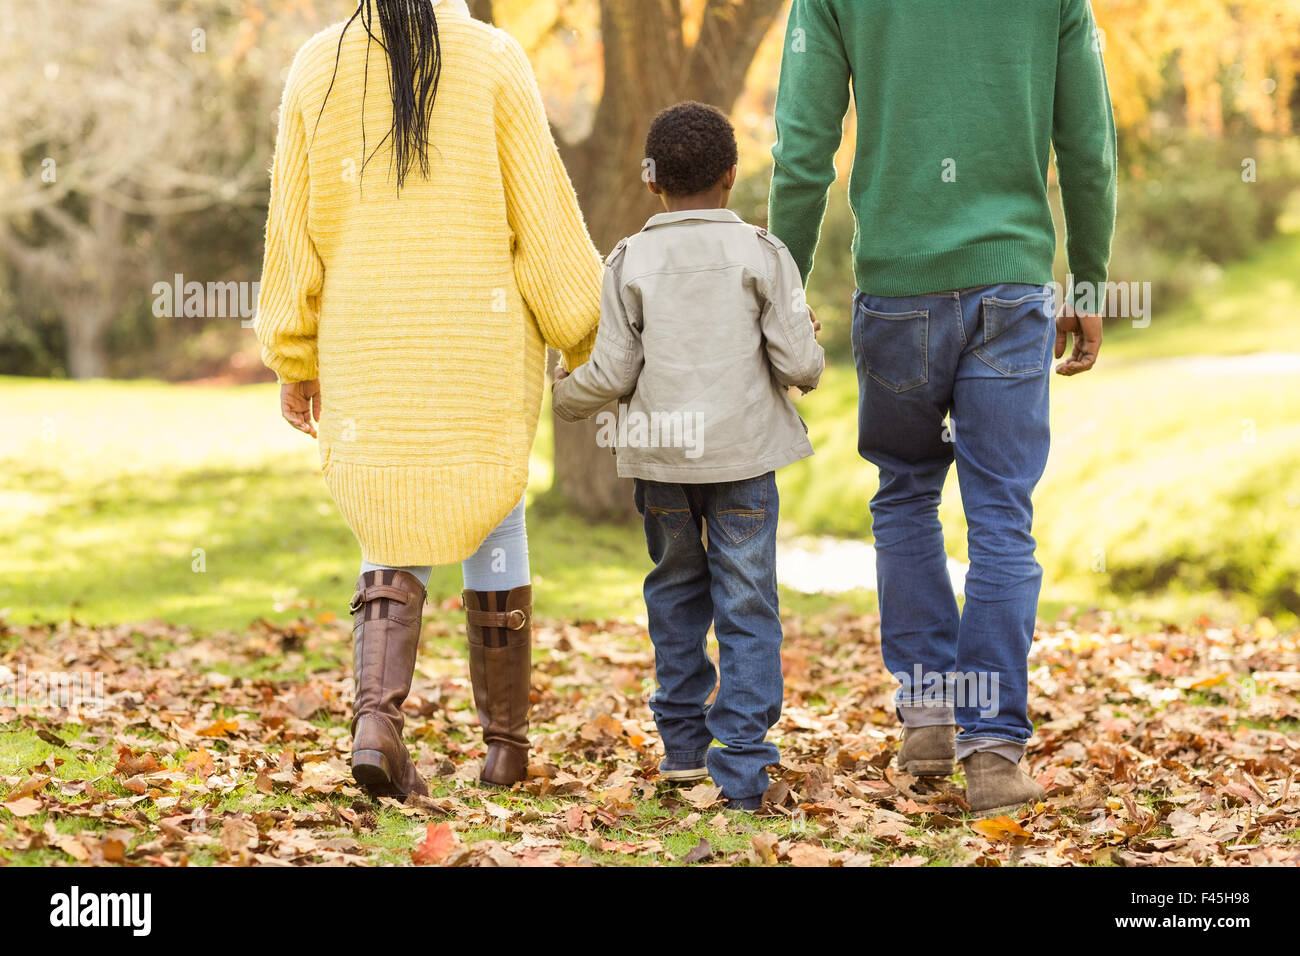 Rear view of a young family Stock Photo